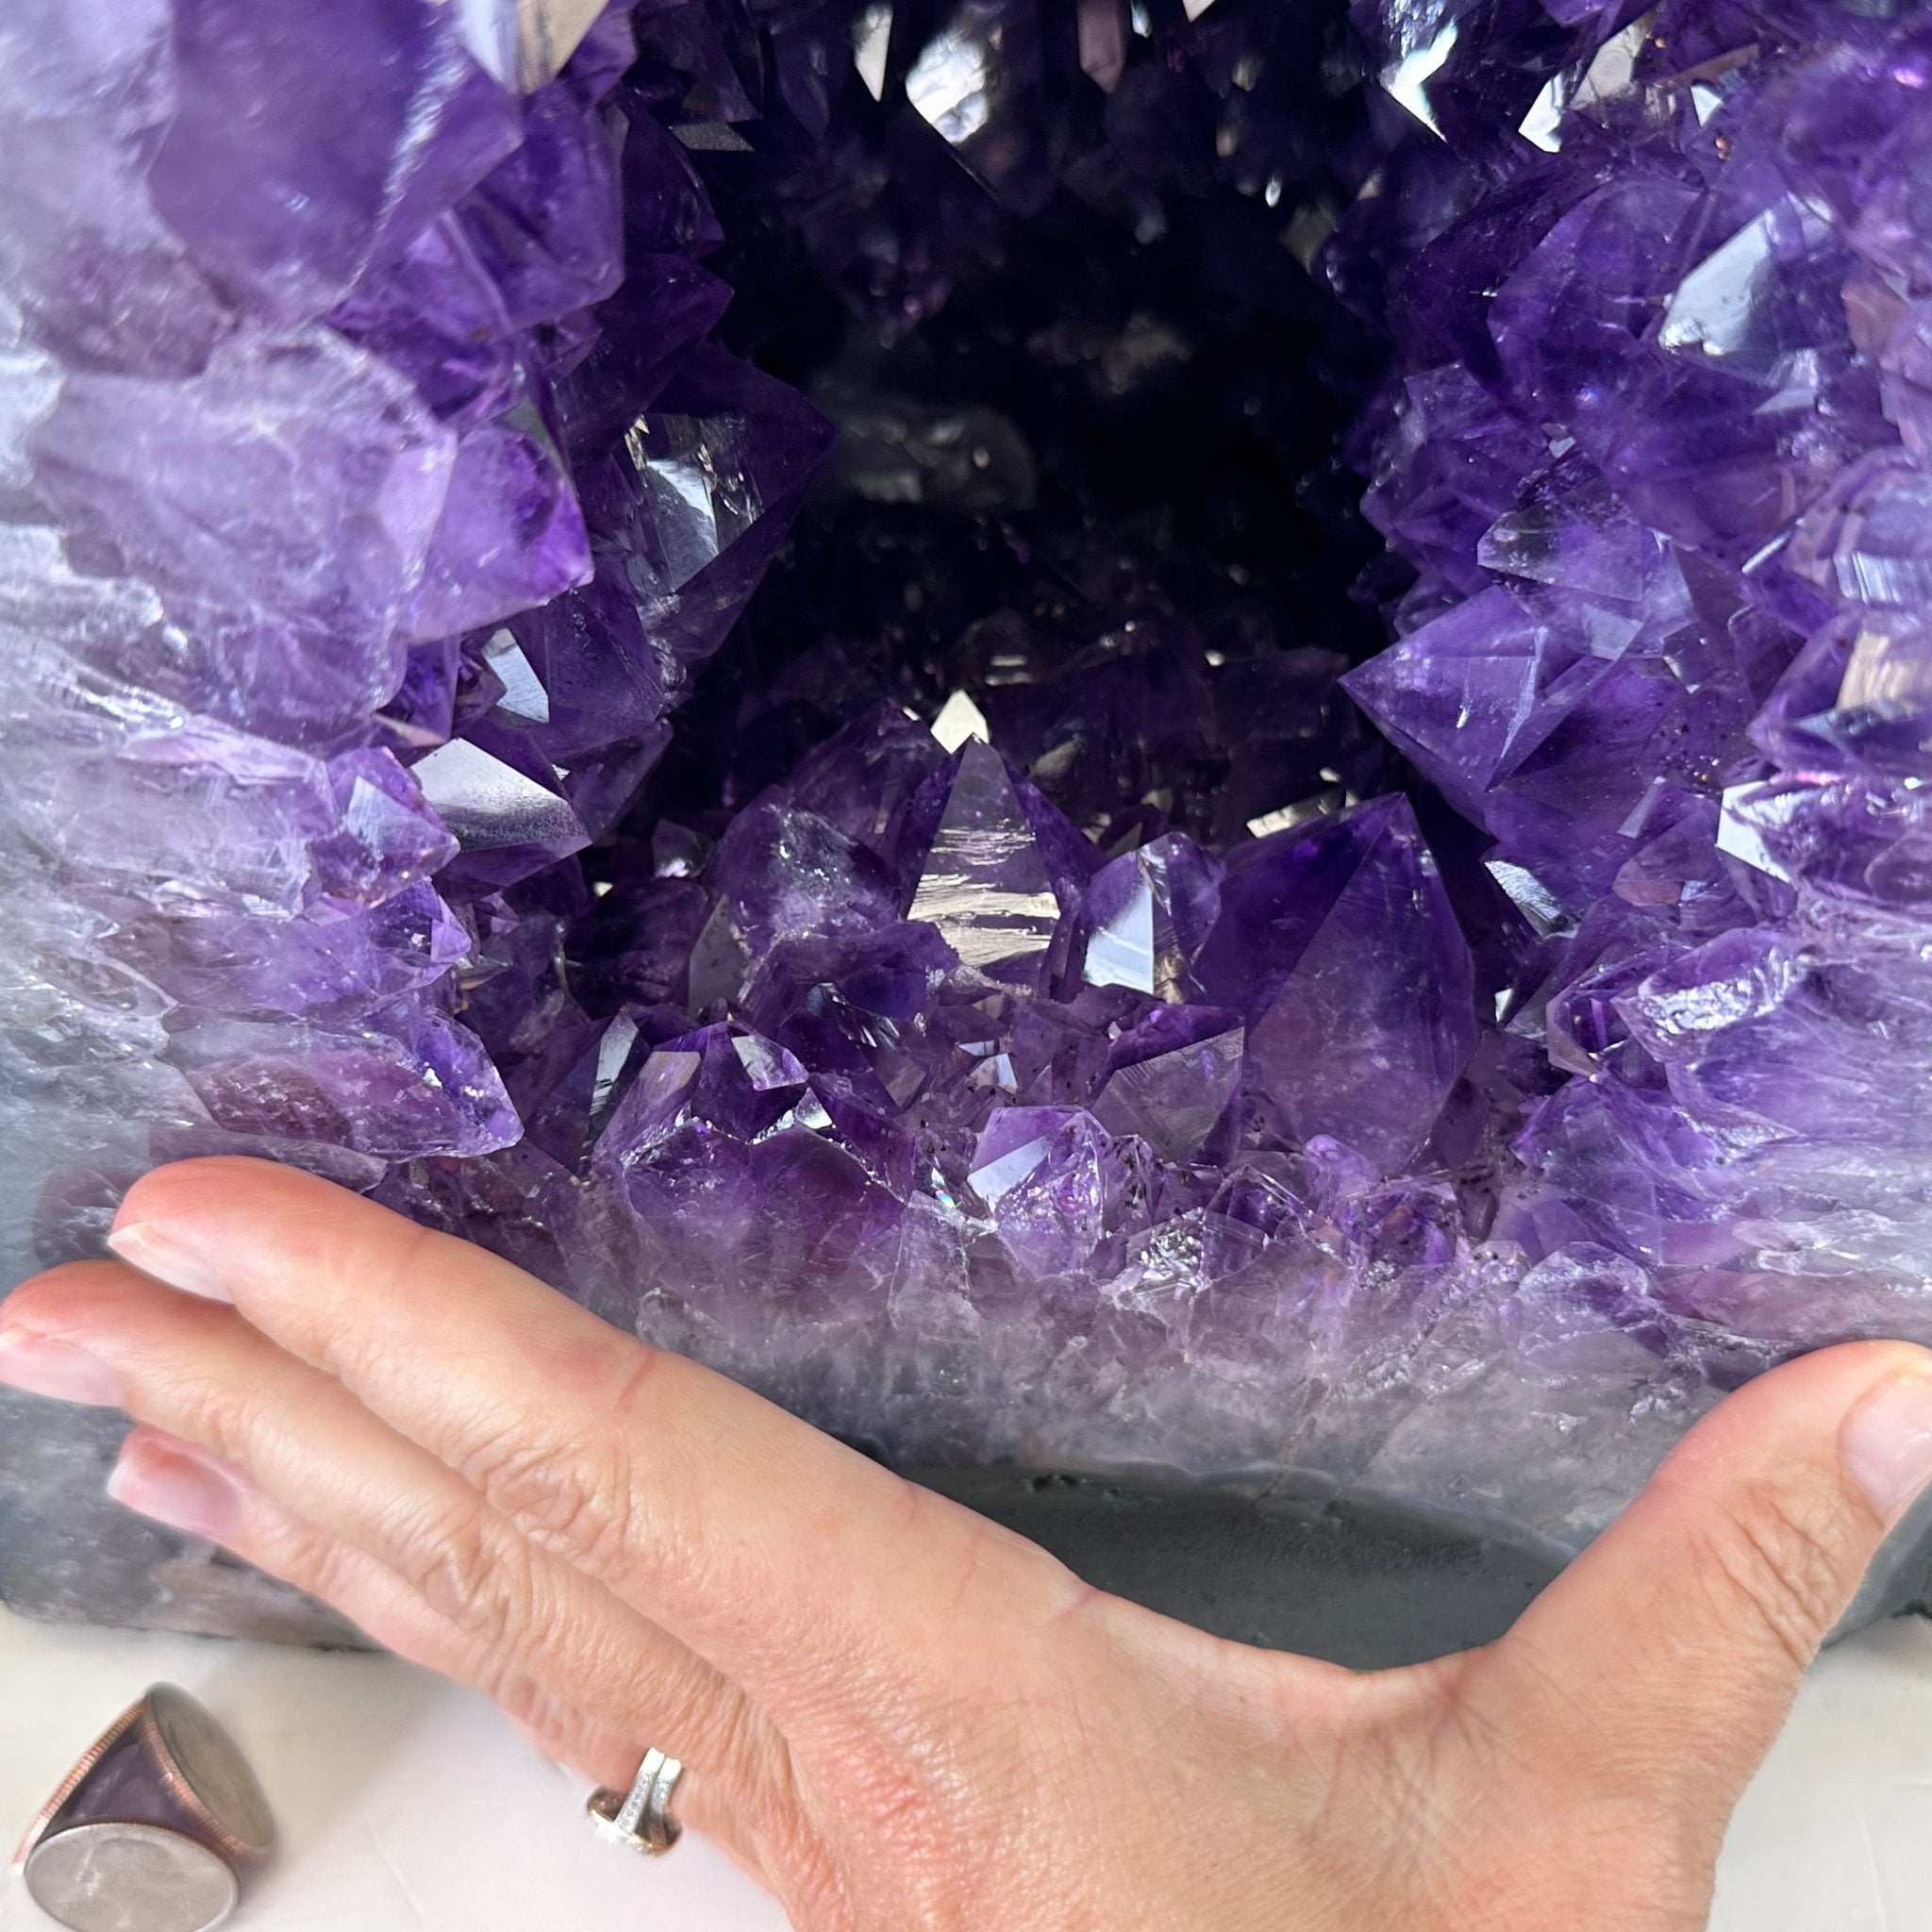 Extra Plus Quality Brazilian Amethyst Cathedral, 74.2 lbs & 19.1" Tall, Model #5601-0884 by Brazil Gems - Brazil GemsBrazil GemsExtra Plus Quality Brazilian Amethyst Cathedral, 74.2 lbs & 19.1" Tall, Model #5601-0884 by Brazil GemsCathedrals5601-0884